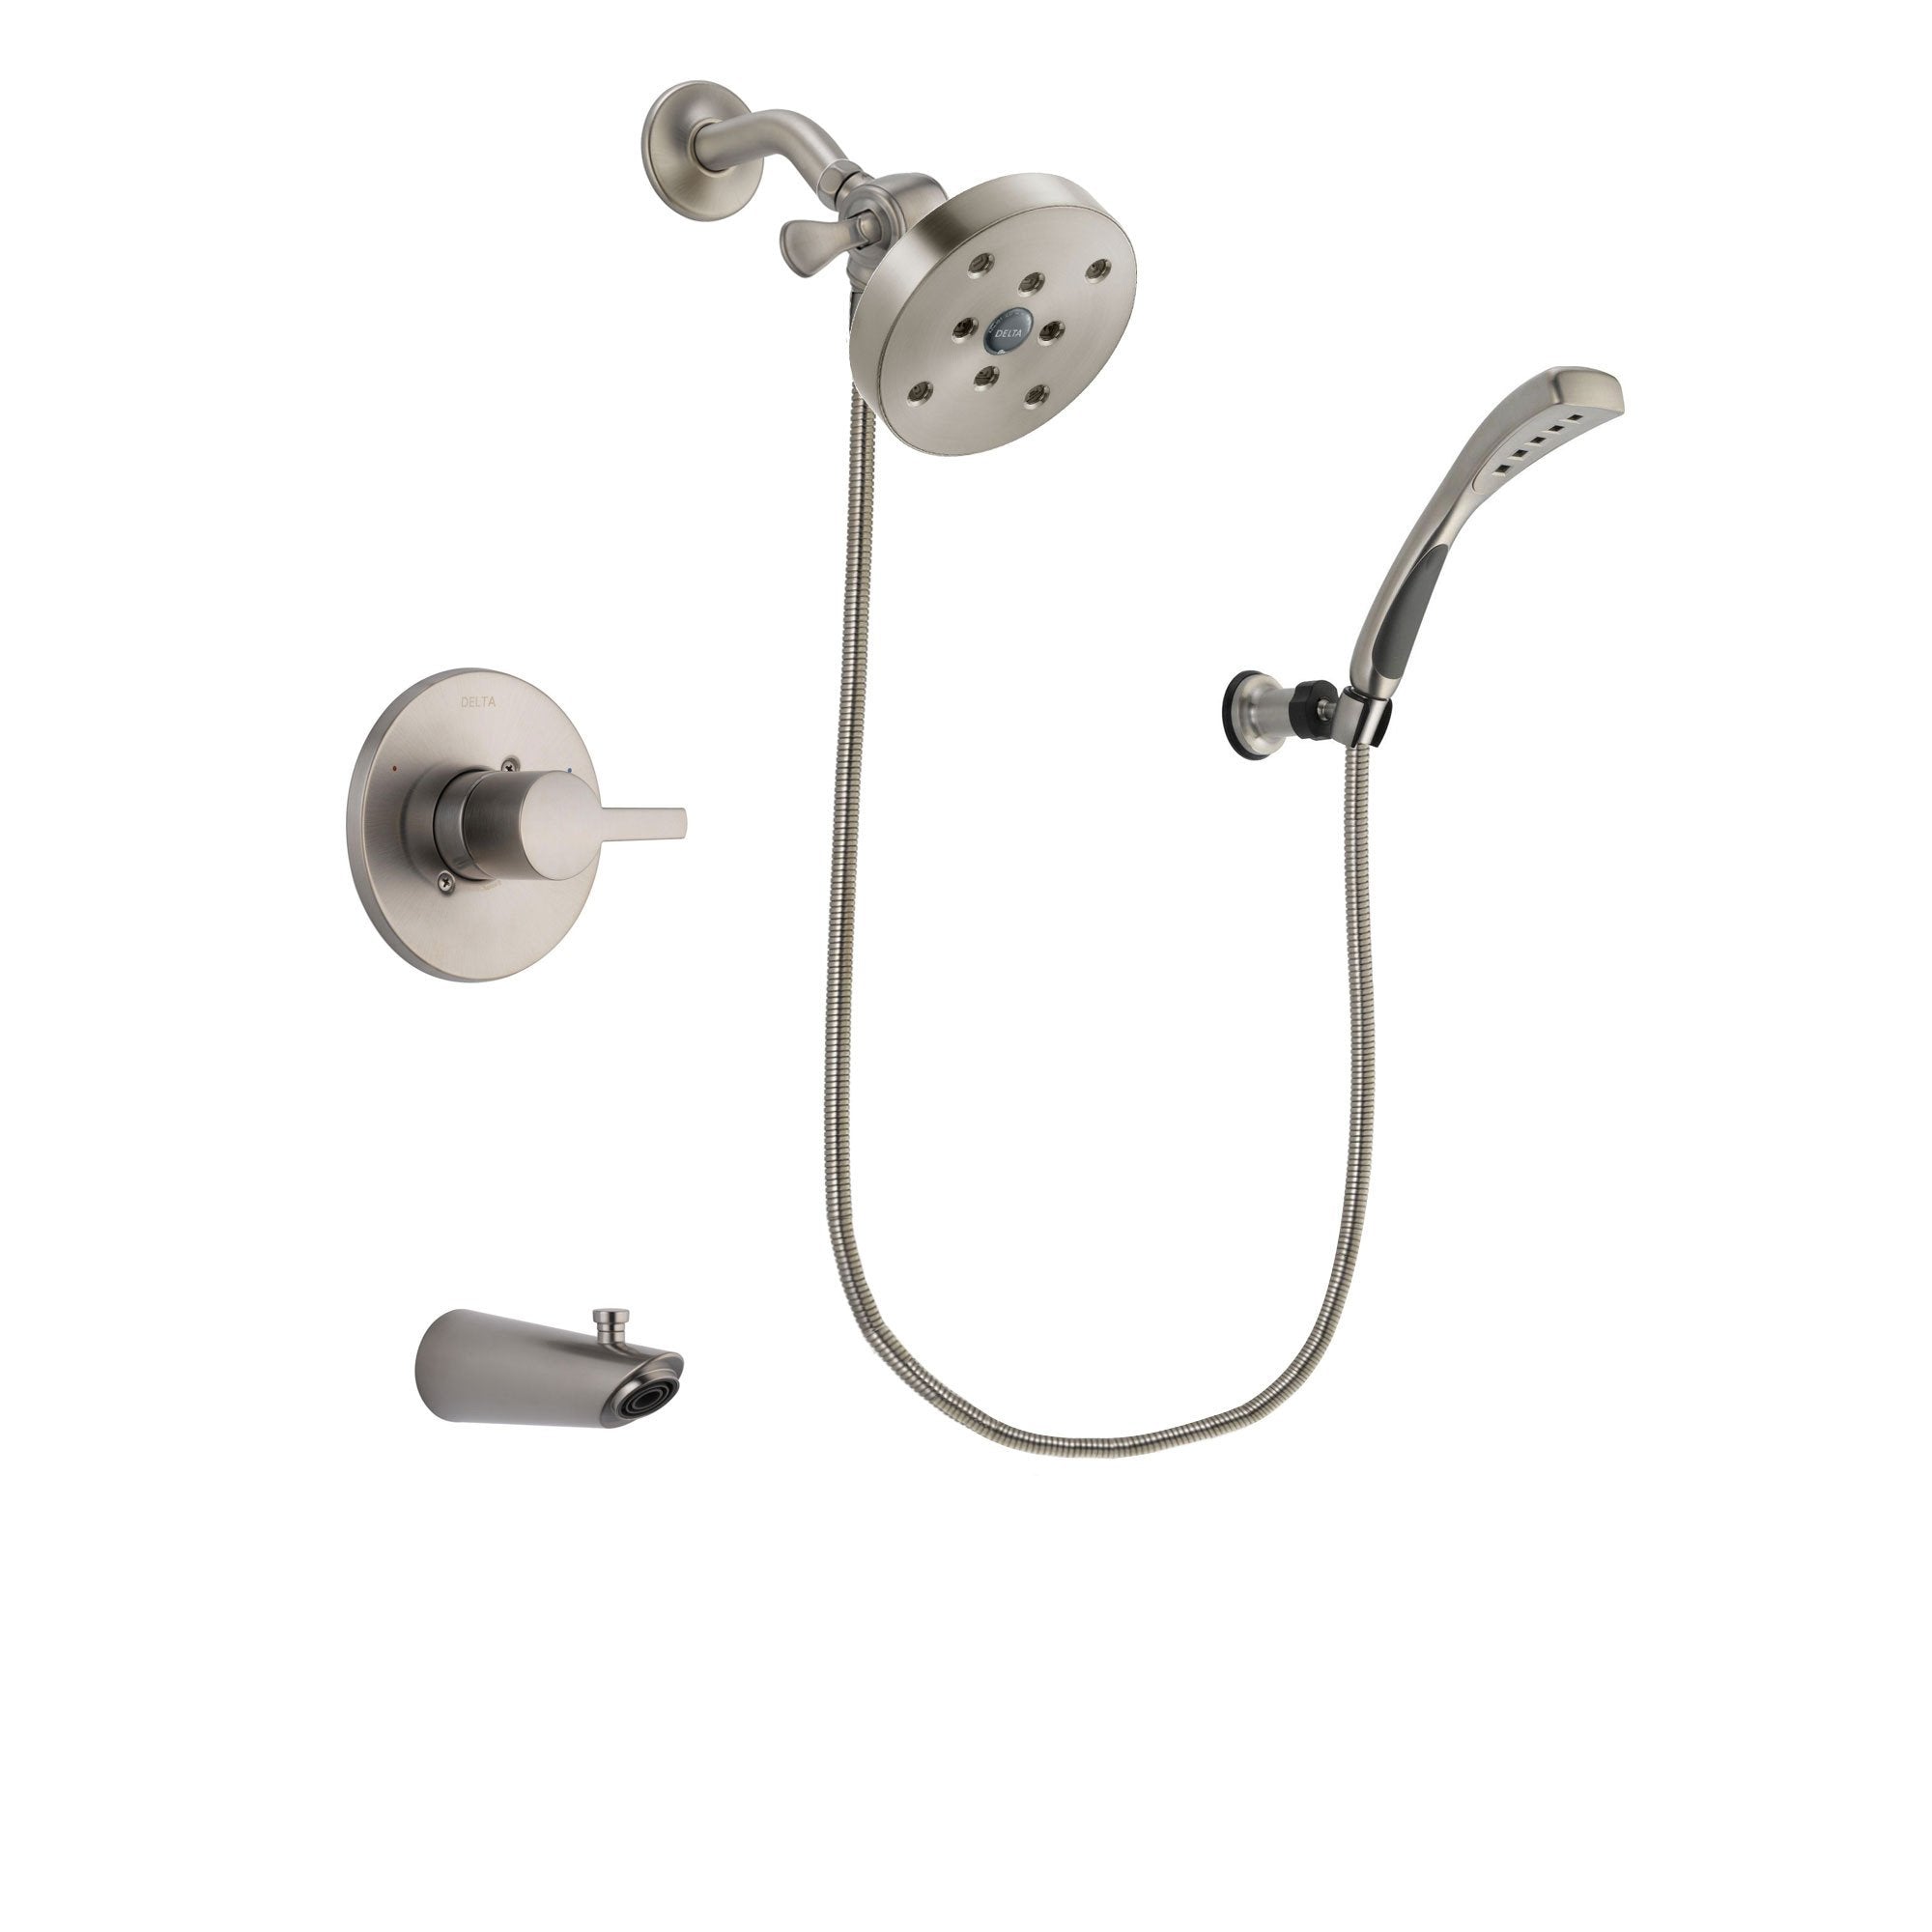 Delta Compel Stainless Steel Finish Tub and Shower Faucet System Package with 5-1/2 inch Shower Head and Wall Mounted Handshower Includes Rough-in Valve and Tub Spout DSP1901V